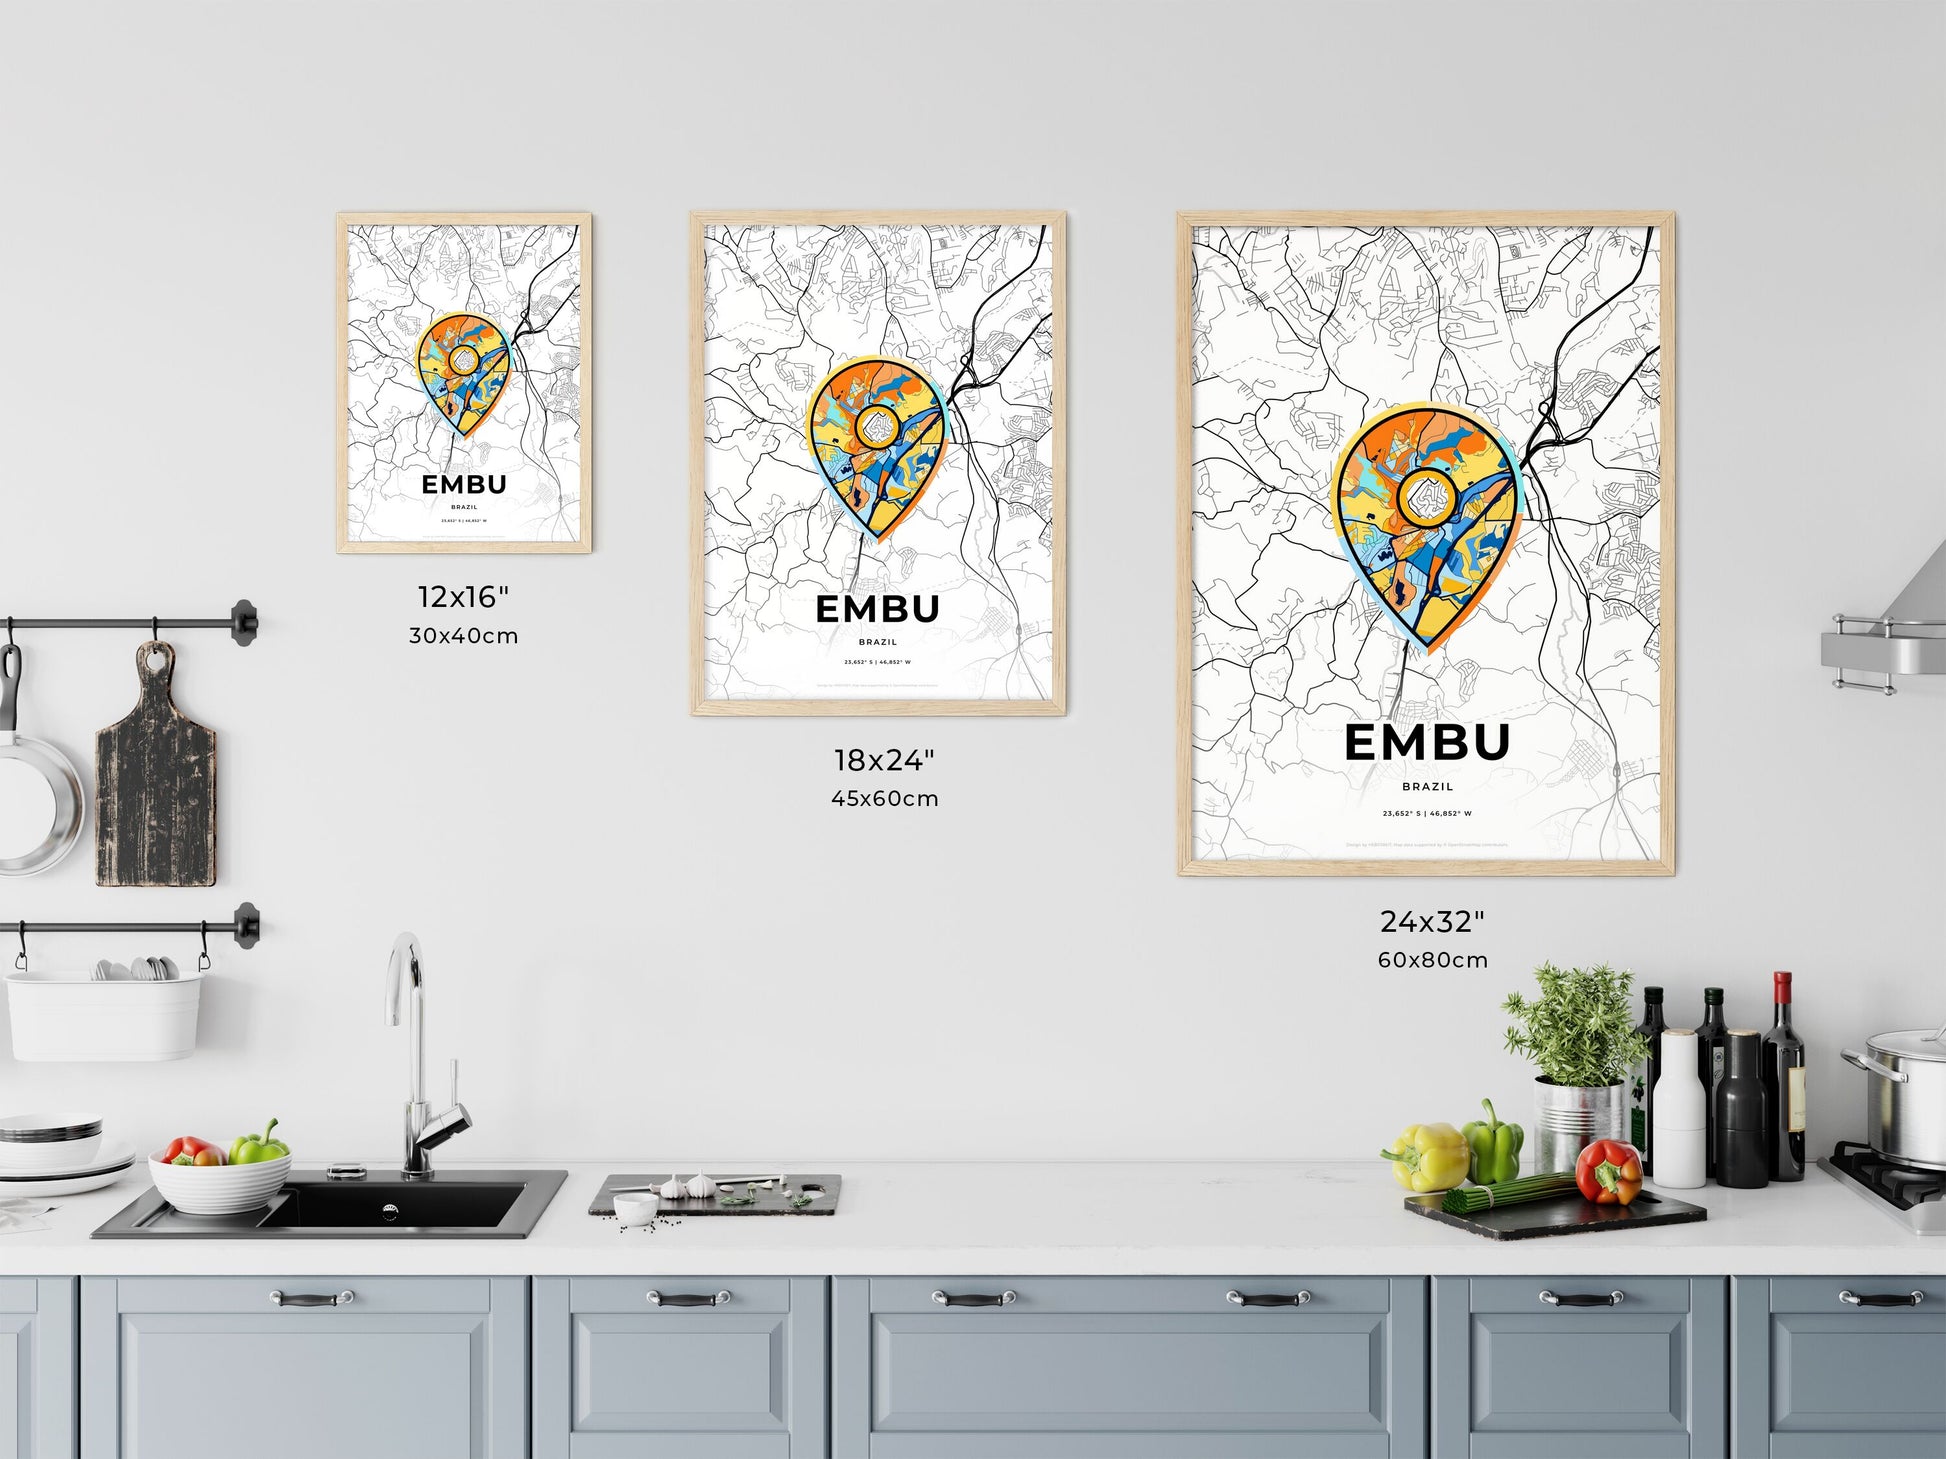 EMBU BRAZIL minimal art map with a colorful icon. Where it all began, Couple map gift.